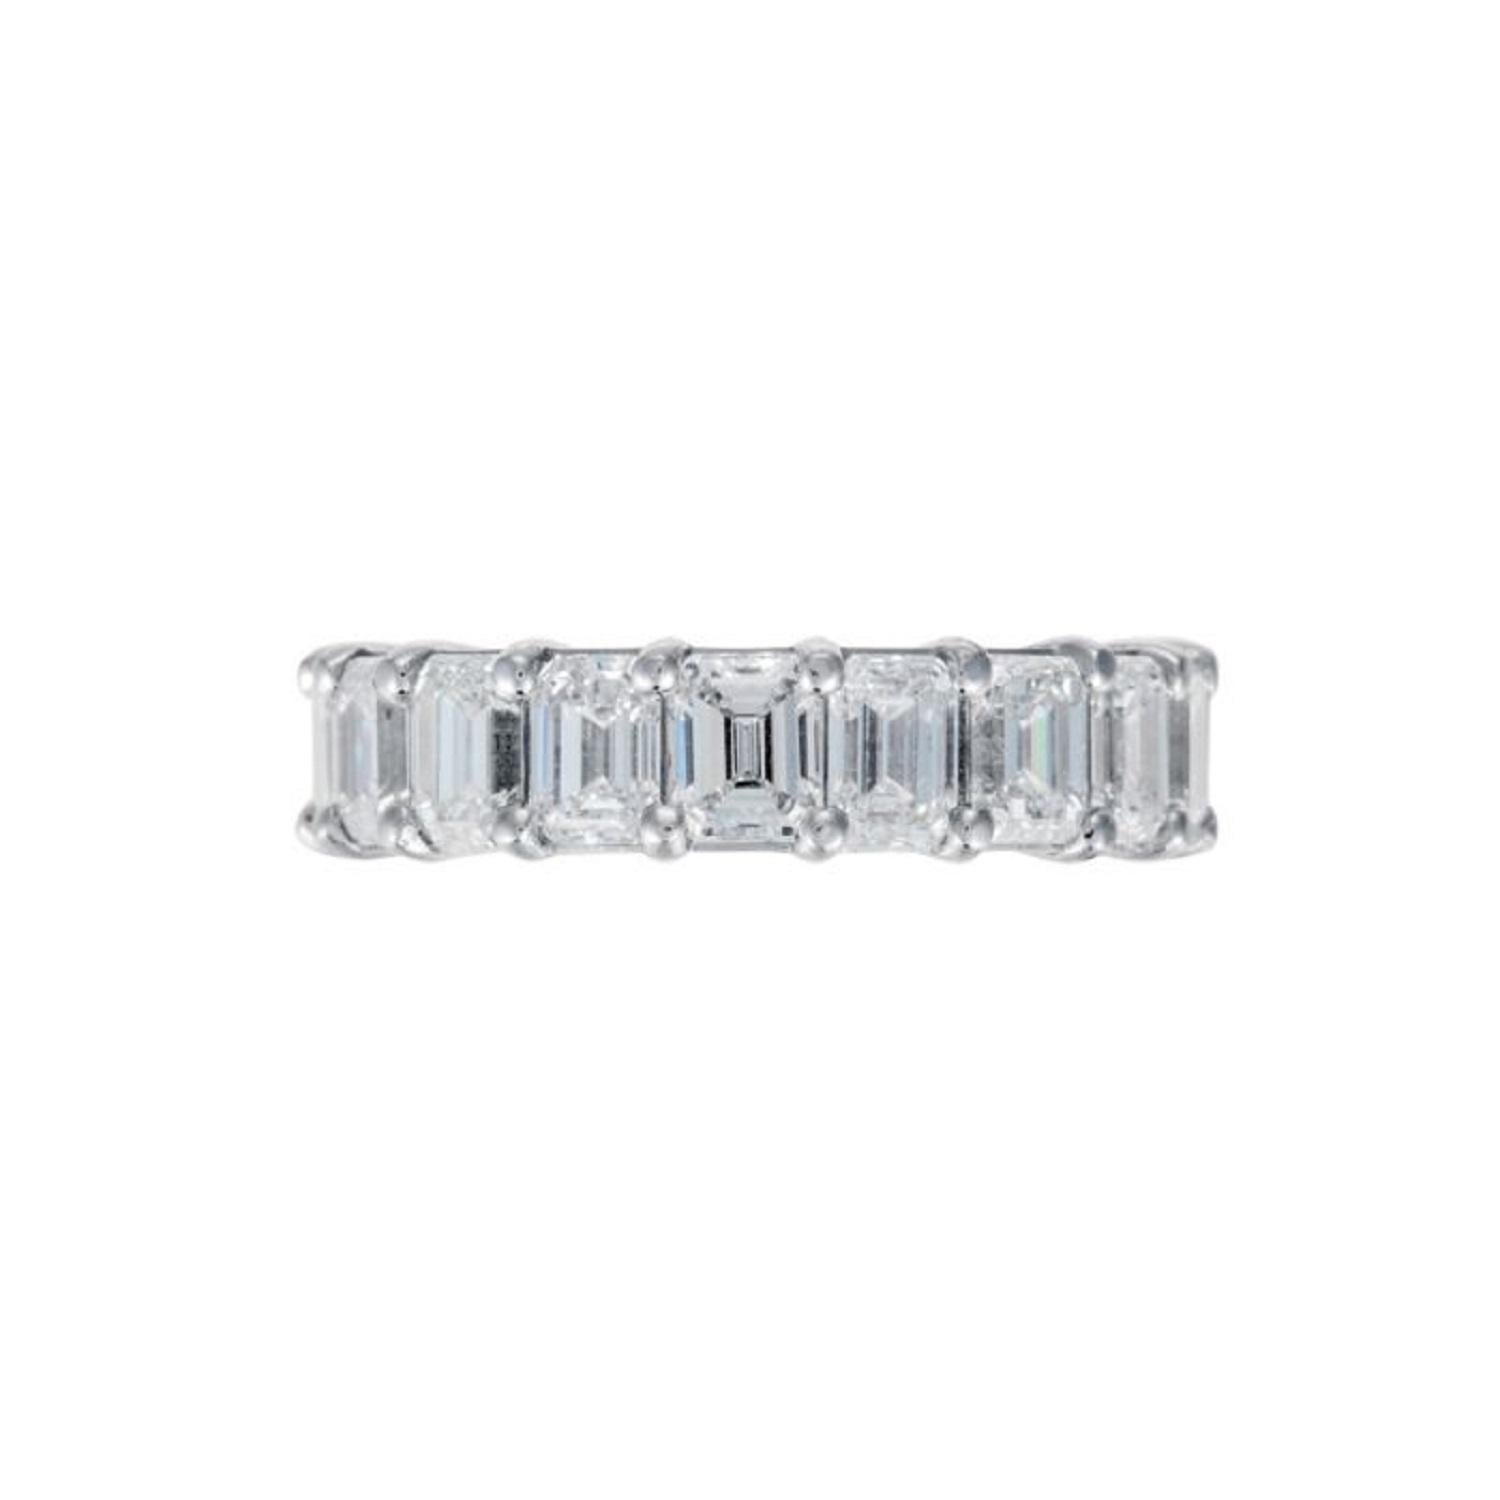 PLATINUM ETERNITY ALL THE WAY AROUND BAND SET WITH TOTAL OF 11.26CT OF GIA CERTIFIED EMERALD DIAMONDS D-G COLOR AND VVS-VS CLARITY. TOTAL OF 15 STONES
Diana M. is a leading supplier of top-quality fine jewelry for over 35 years.
Diana M is one-stop